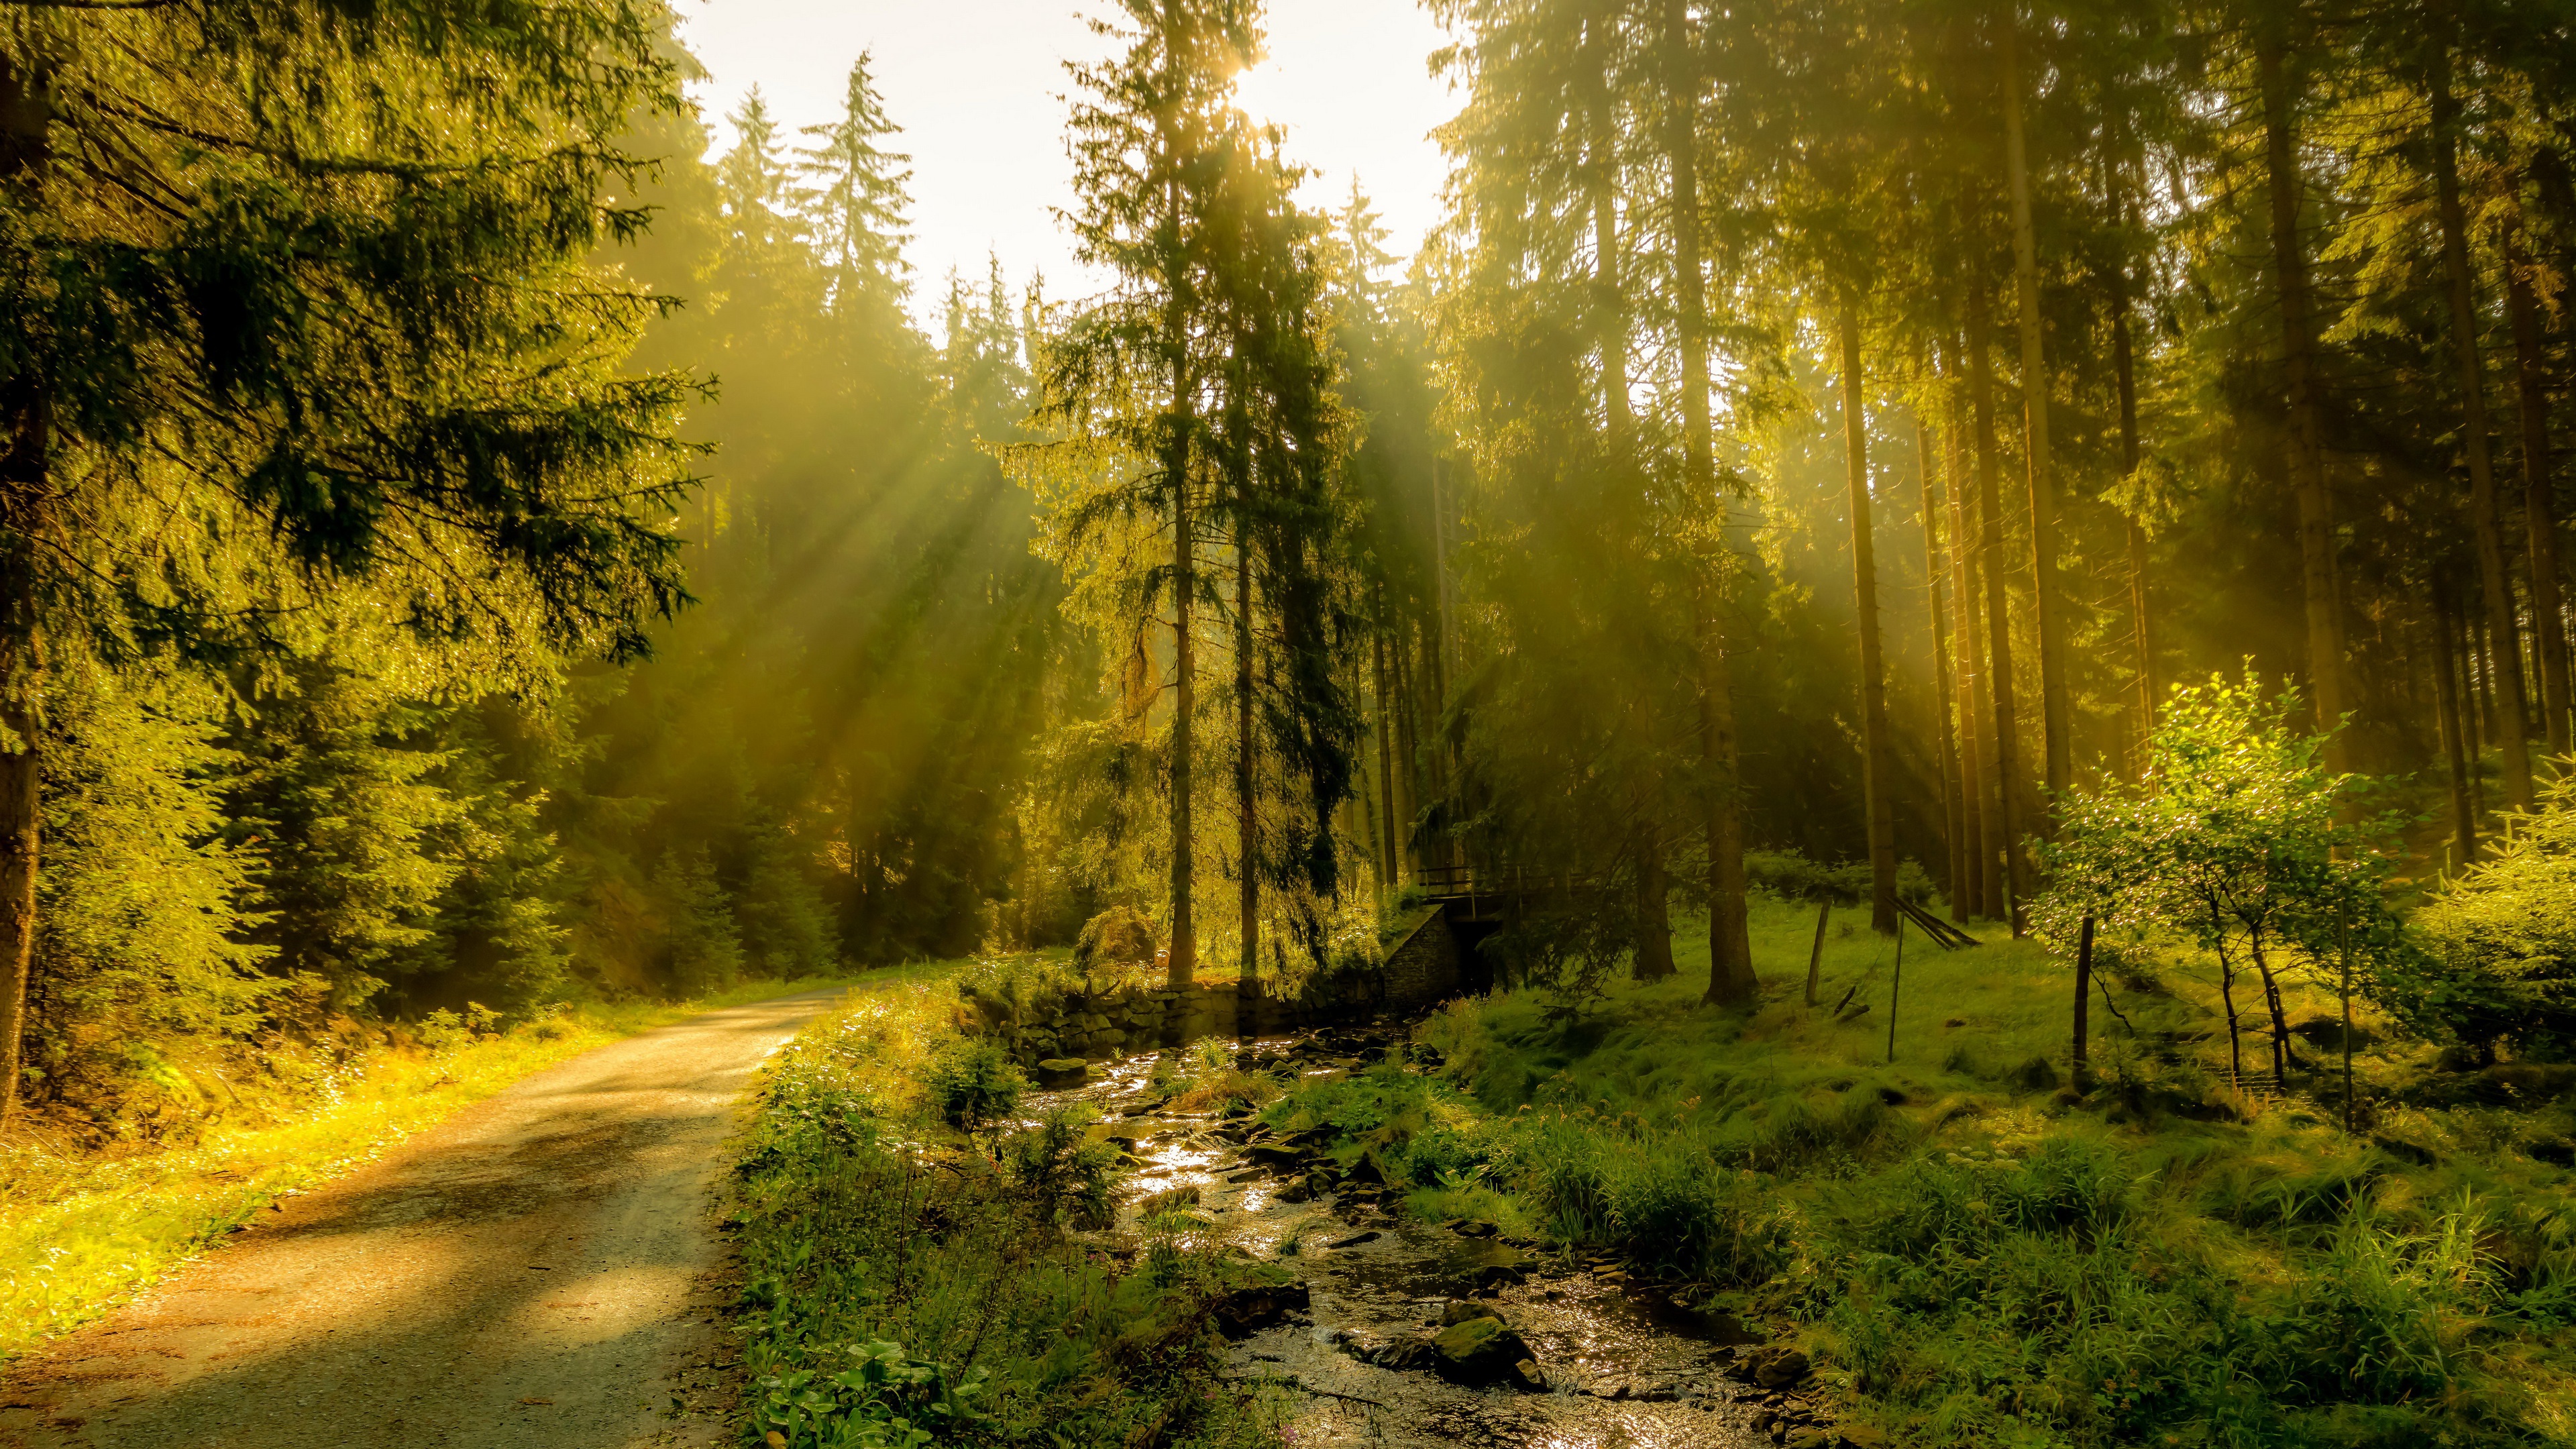 General 3840x2160 nature outdoors sun rays trees forest